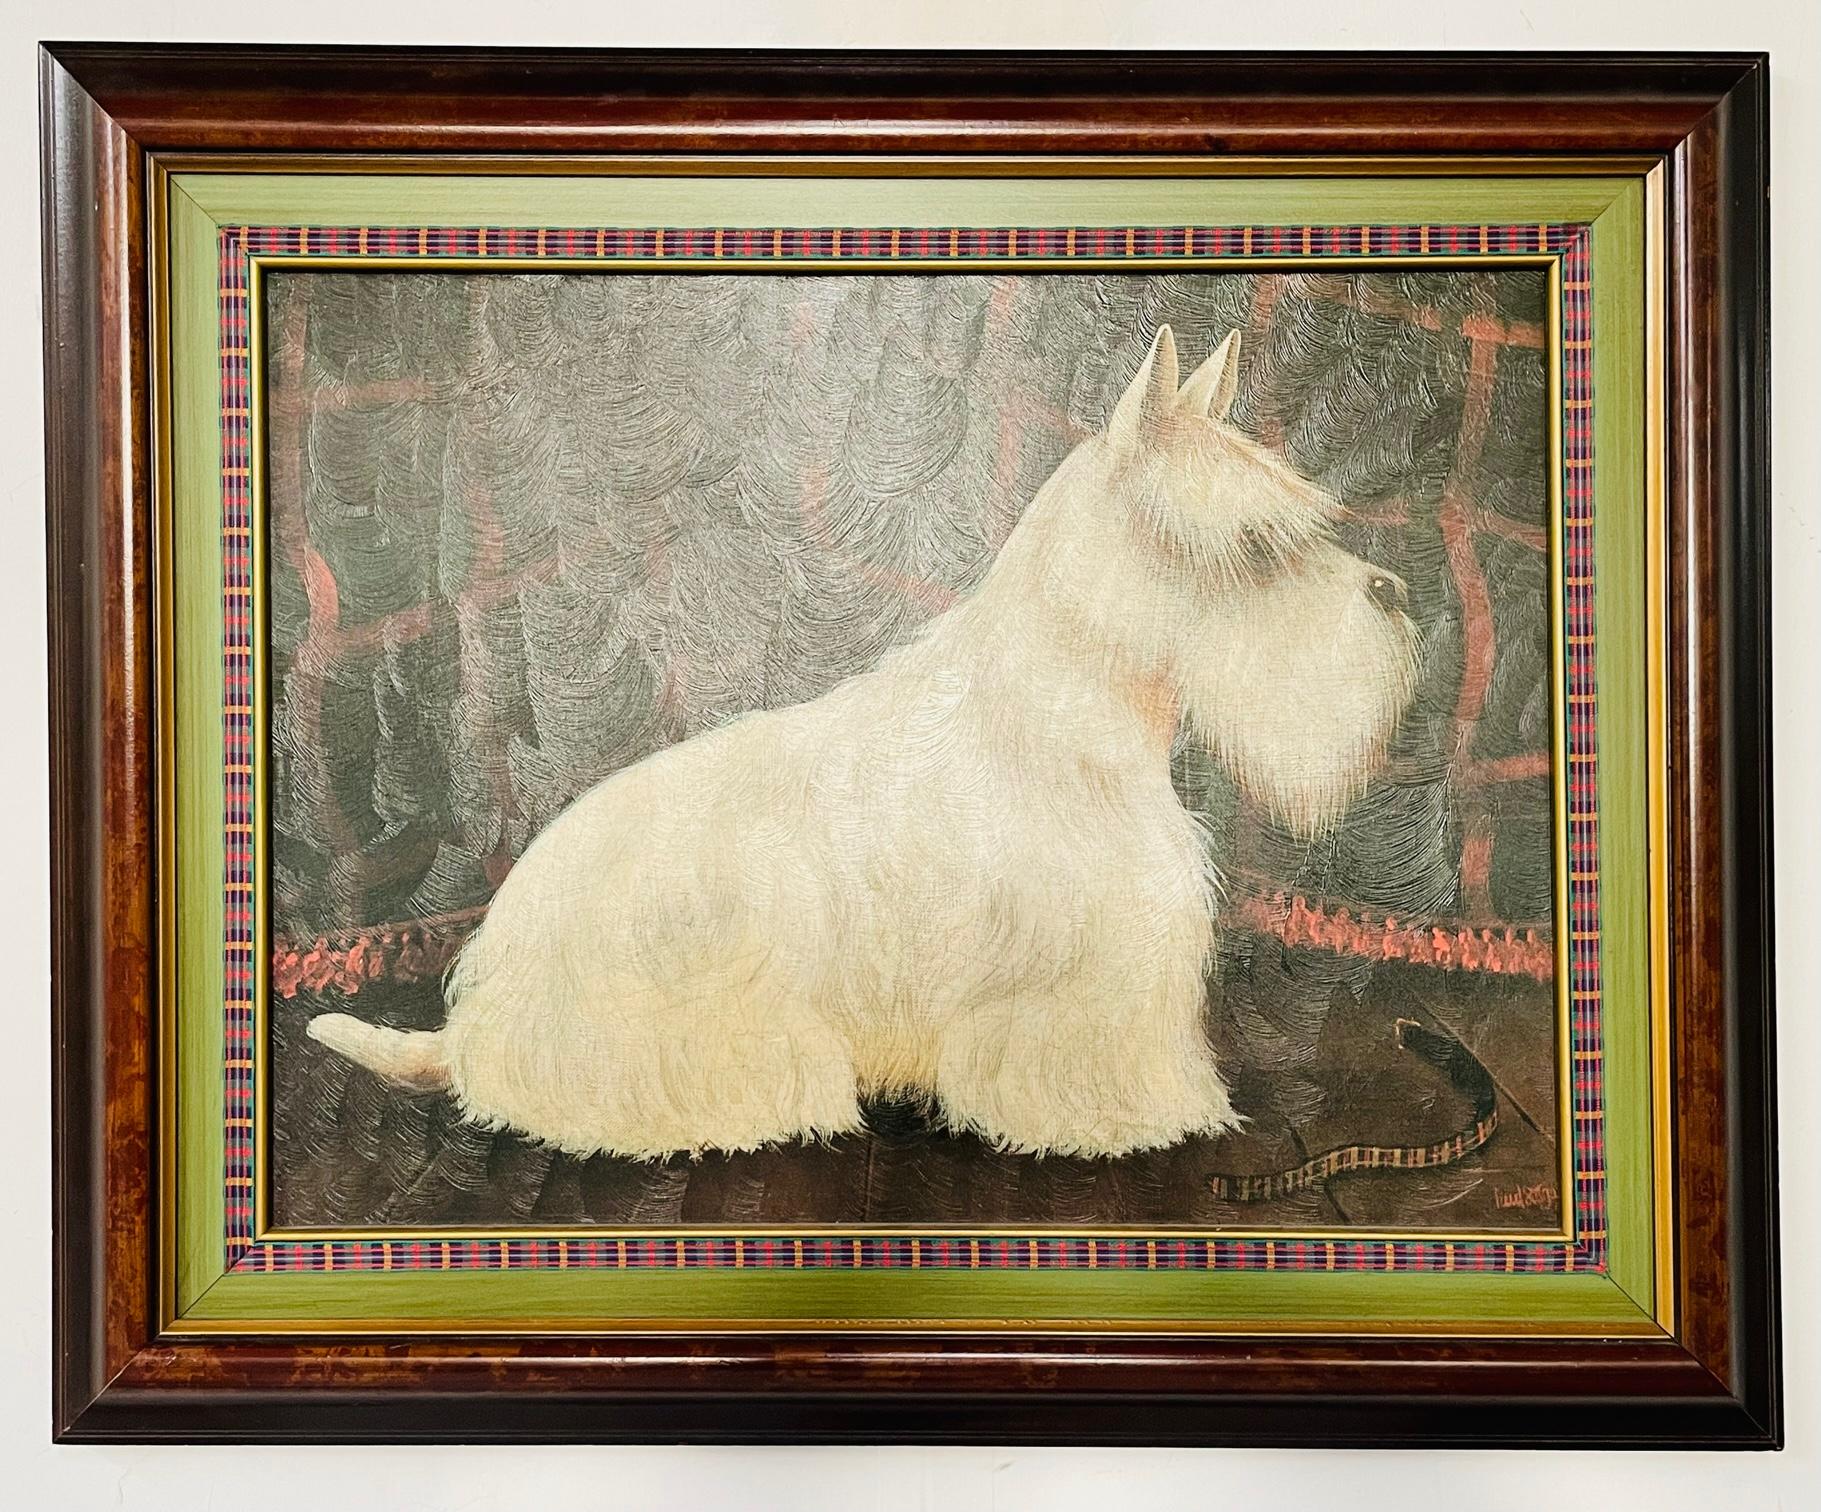 An oil on canvas portrait painting of a white Scottish Terrier dog by British artist Paul Stagg. The painting depicts a white Scotty terrier in a tartan draped interior with the tartan collar on the floor. The painting is presented in a quality